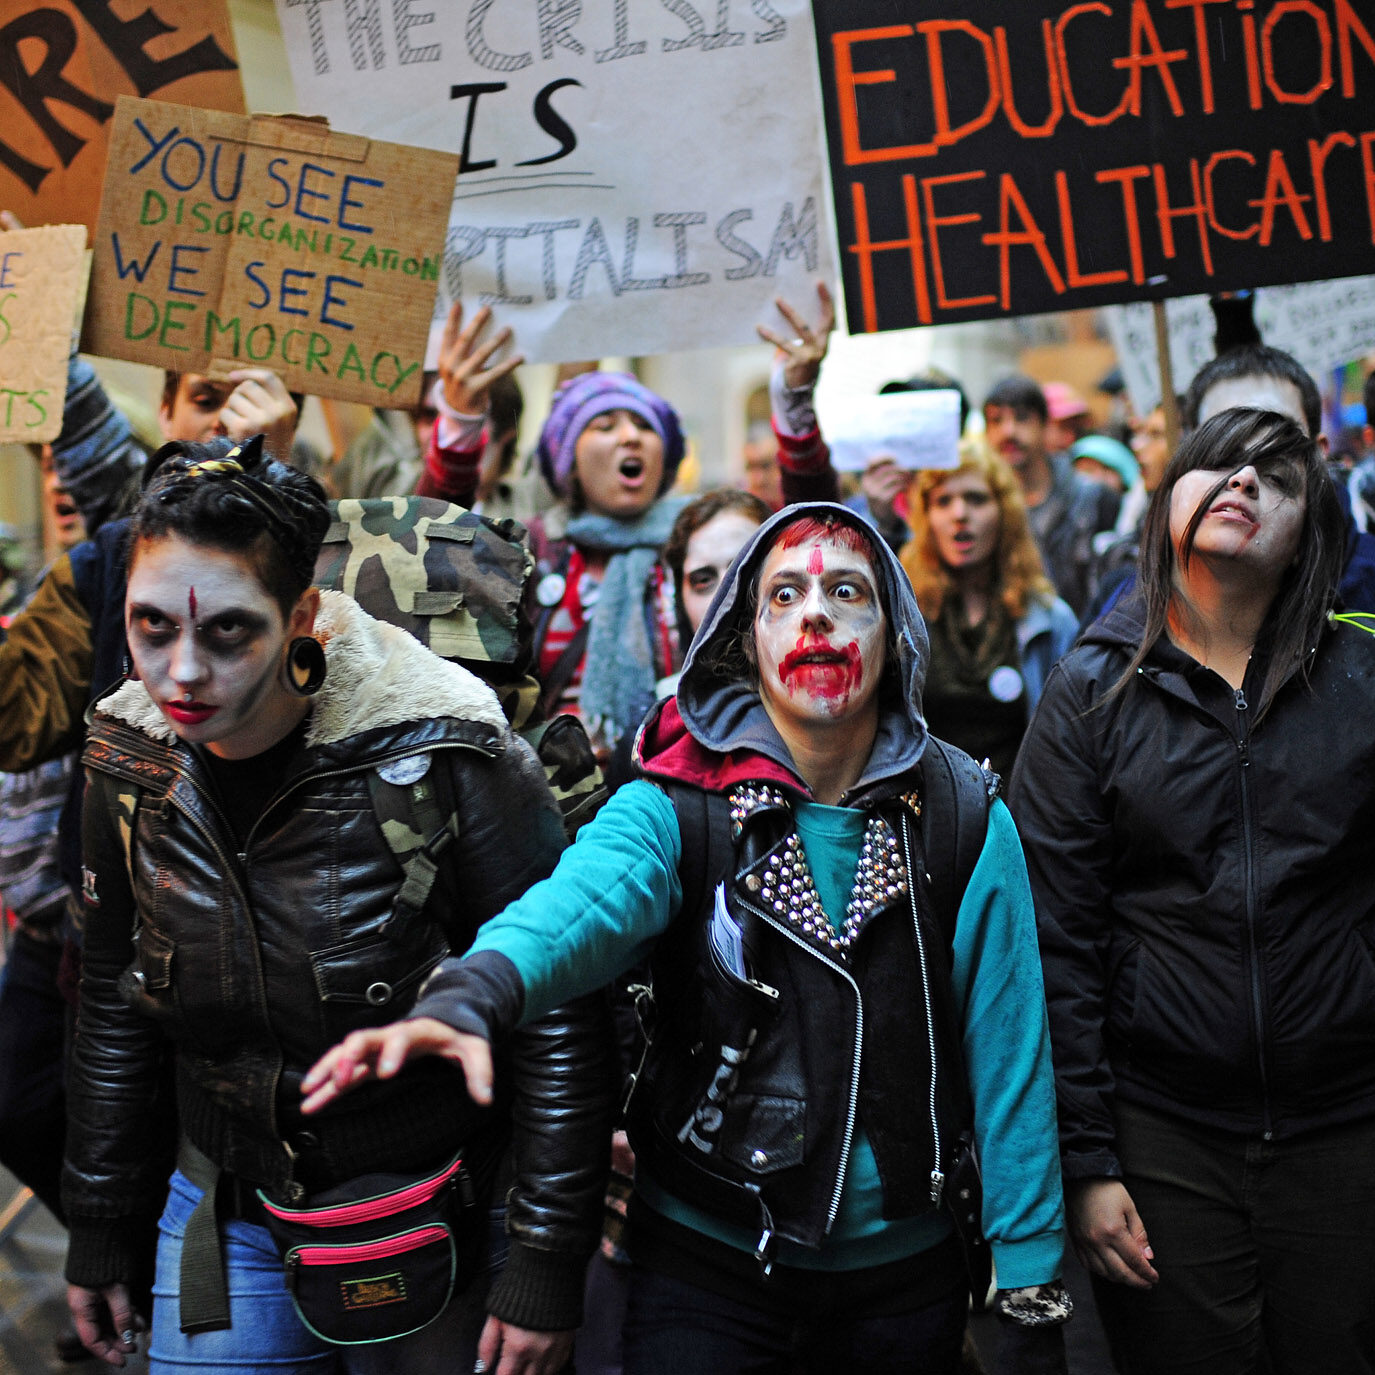 "Occupy Wall Street" demonstrators stage a march past the New York Stock Exchange dressed as corporate zombies during a protest on Wall Street in New York, October 3, 2011. The protestors, speaking out against corporate greed and other issues carried on their occupation of Zuccotti Park, near the New York Stock Exchange, despite mass arrests over the weekend.   AFP PHOTO/Emmanuel Dunand